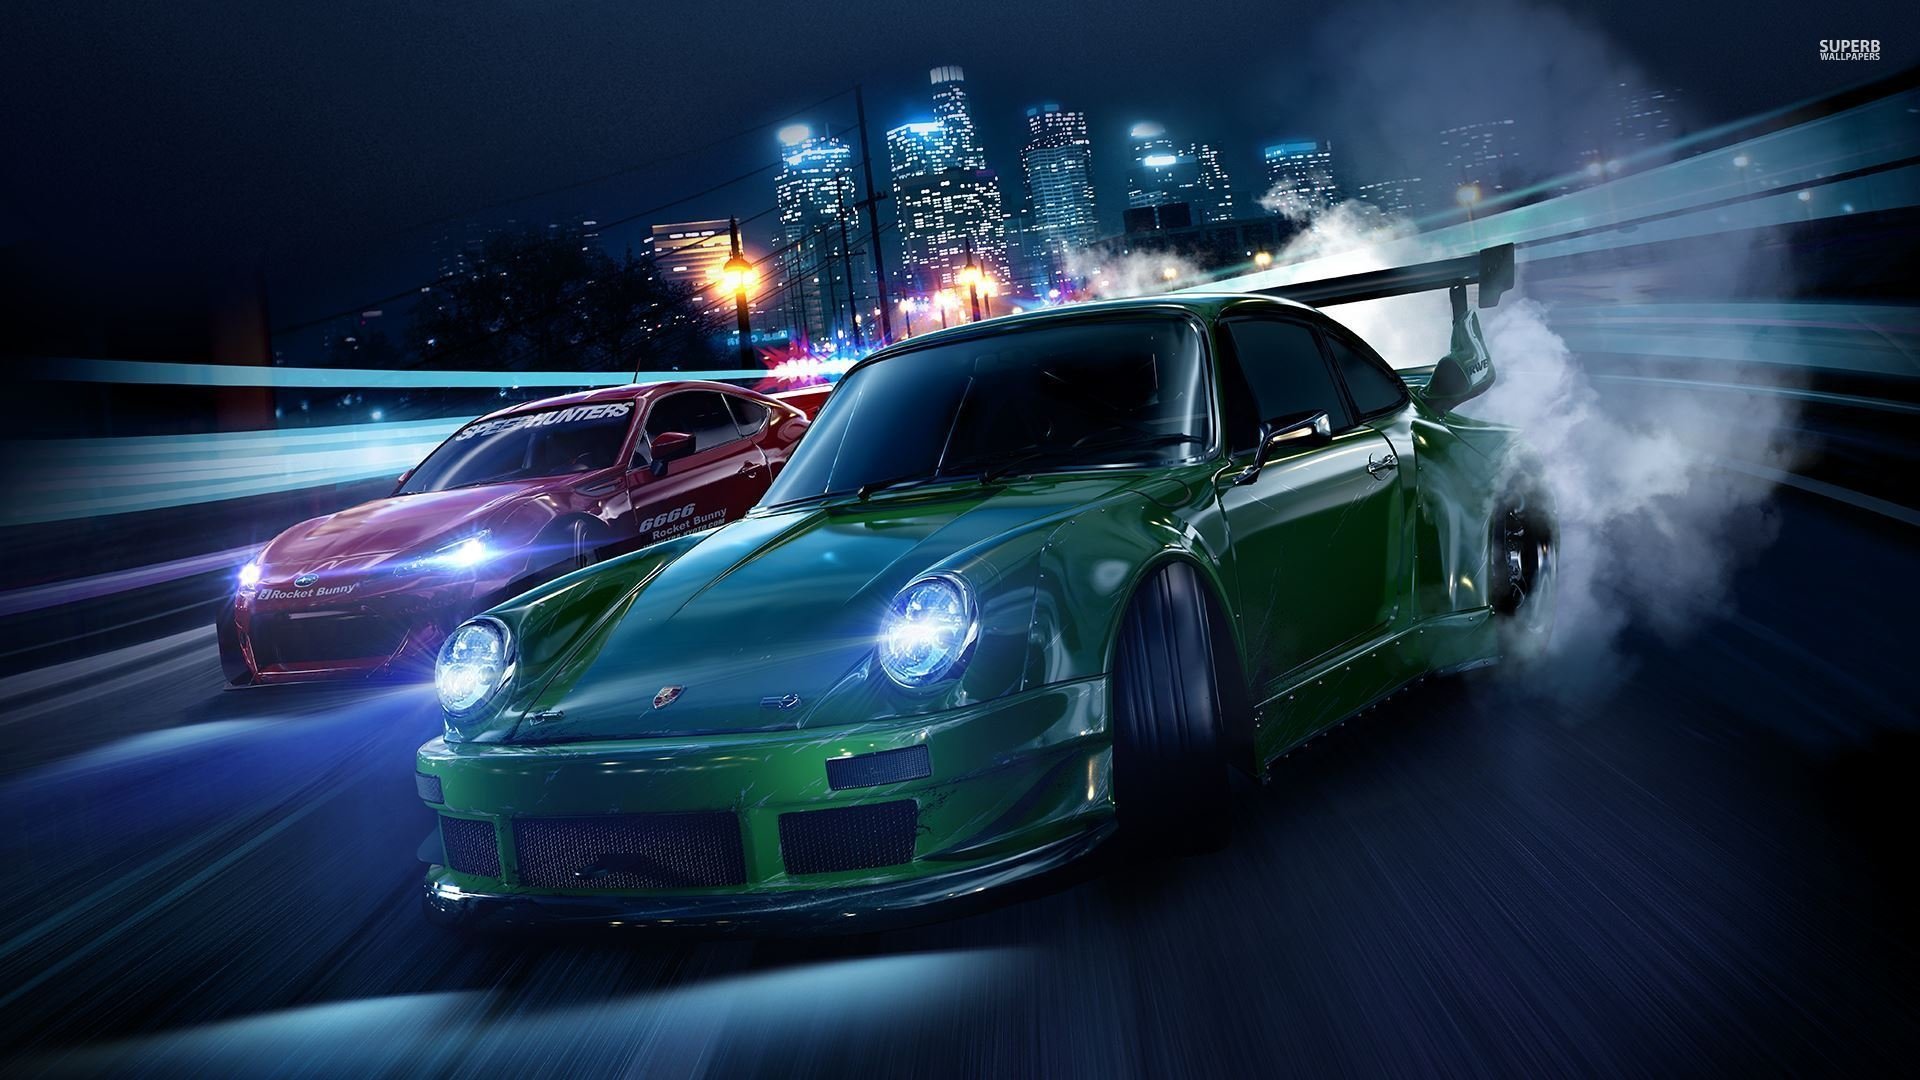 Need For Speed HD Wallpaper Background Image